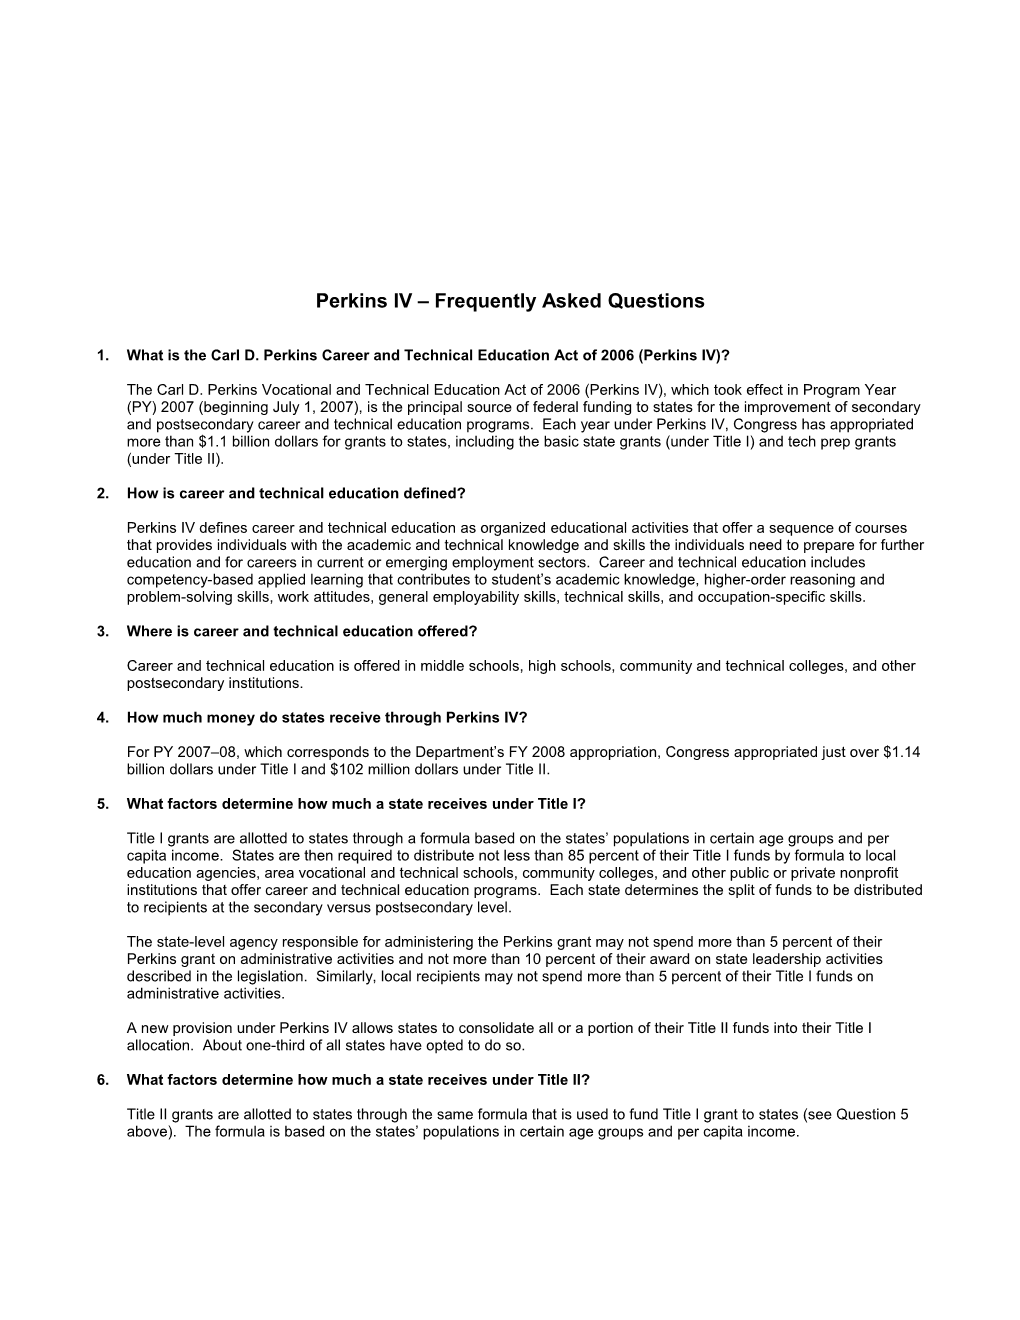 Perkins IV Accountability: Frequently Asked Questions (MS Word)